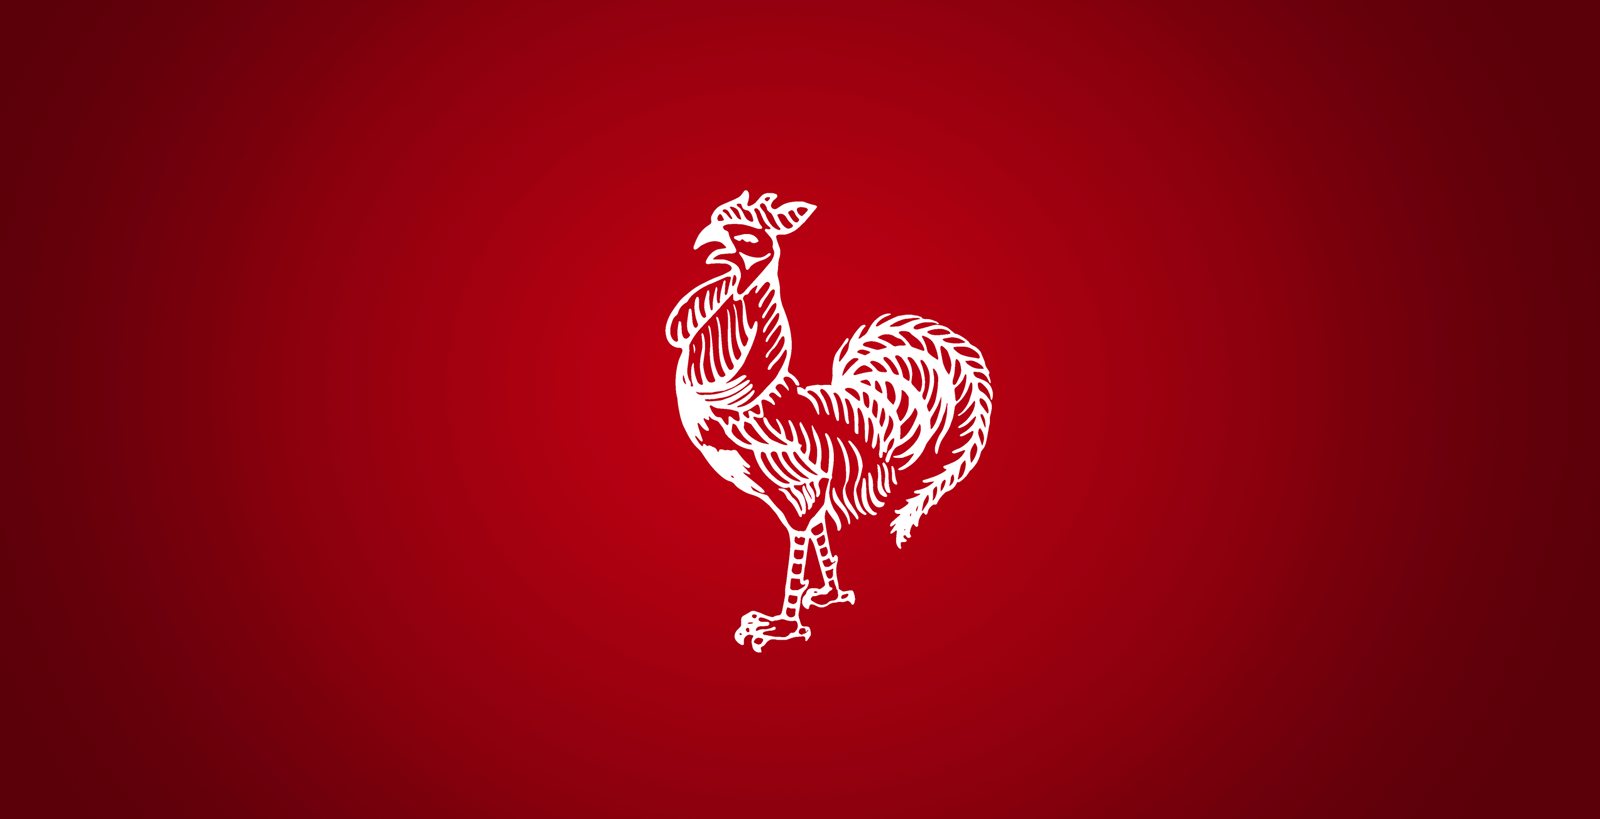 Most Famous Rooster Logo - Huy Fong Foods, Inc